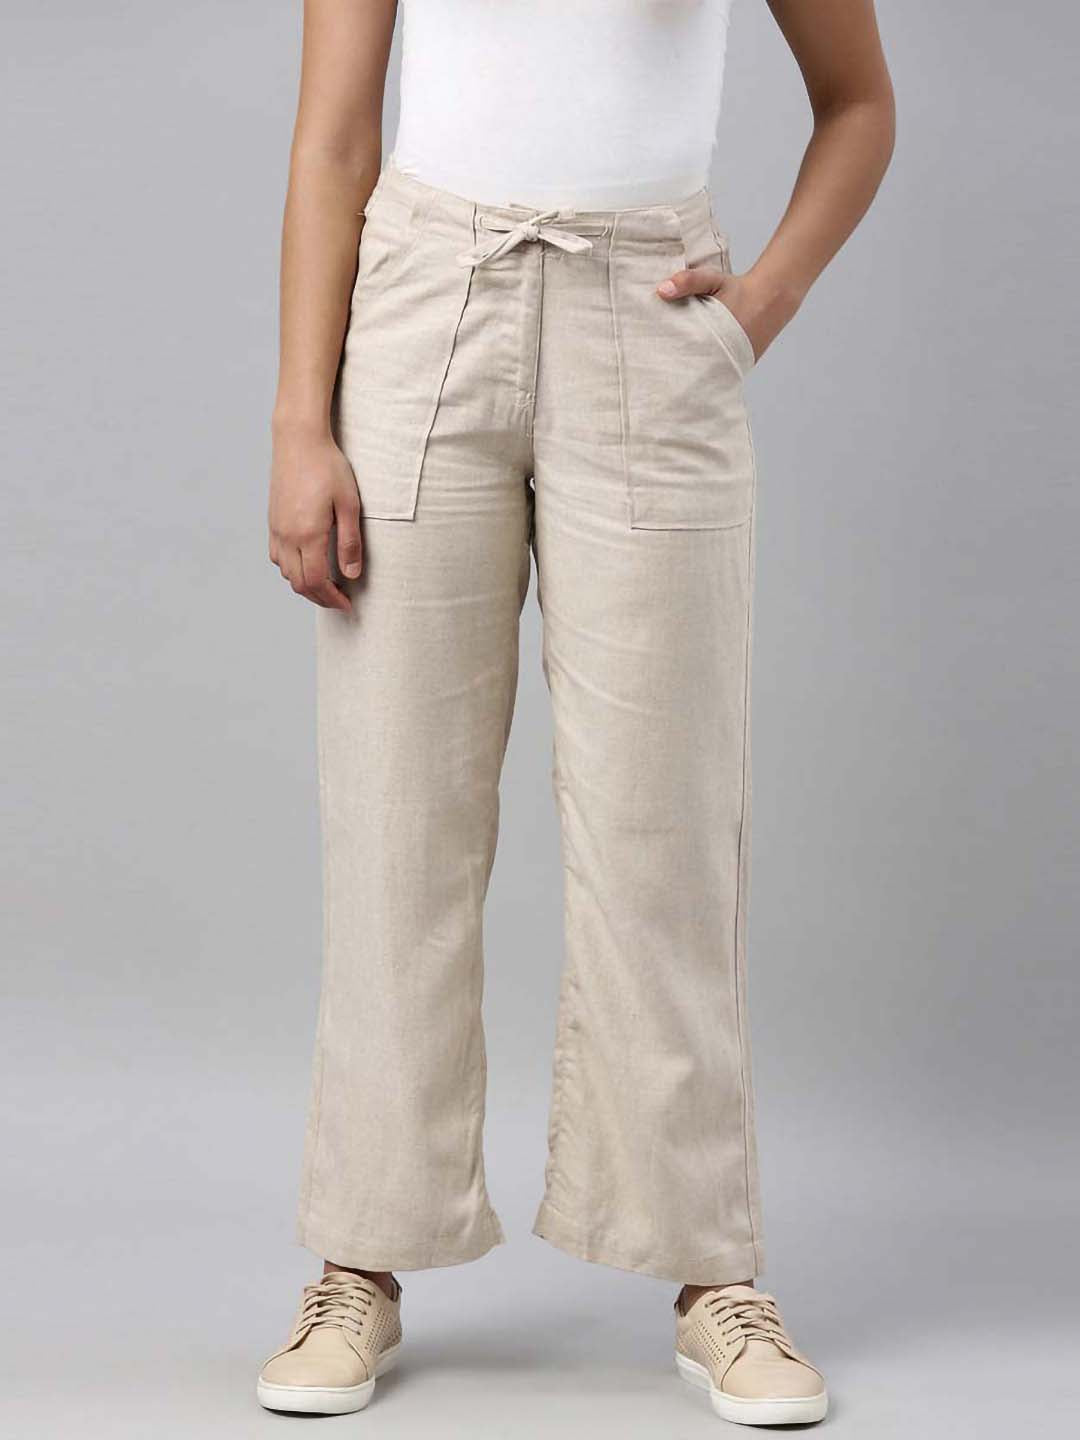 Meilidress Cropped Jogger Pants Have the Perfect Casual Chic Look